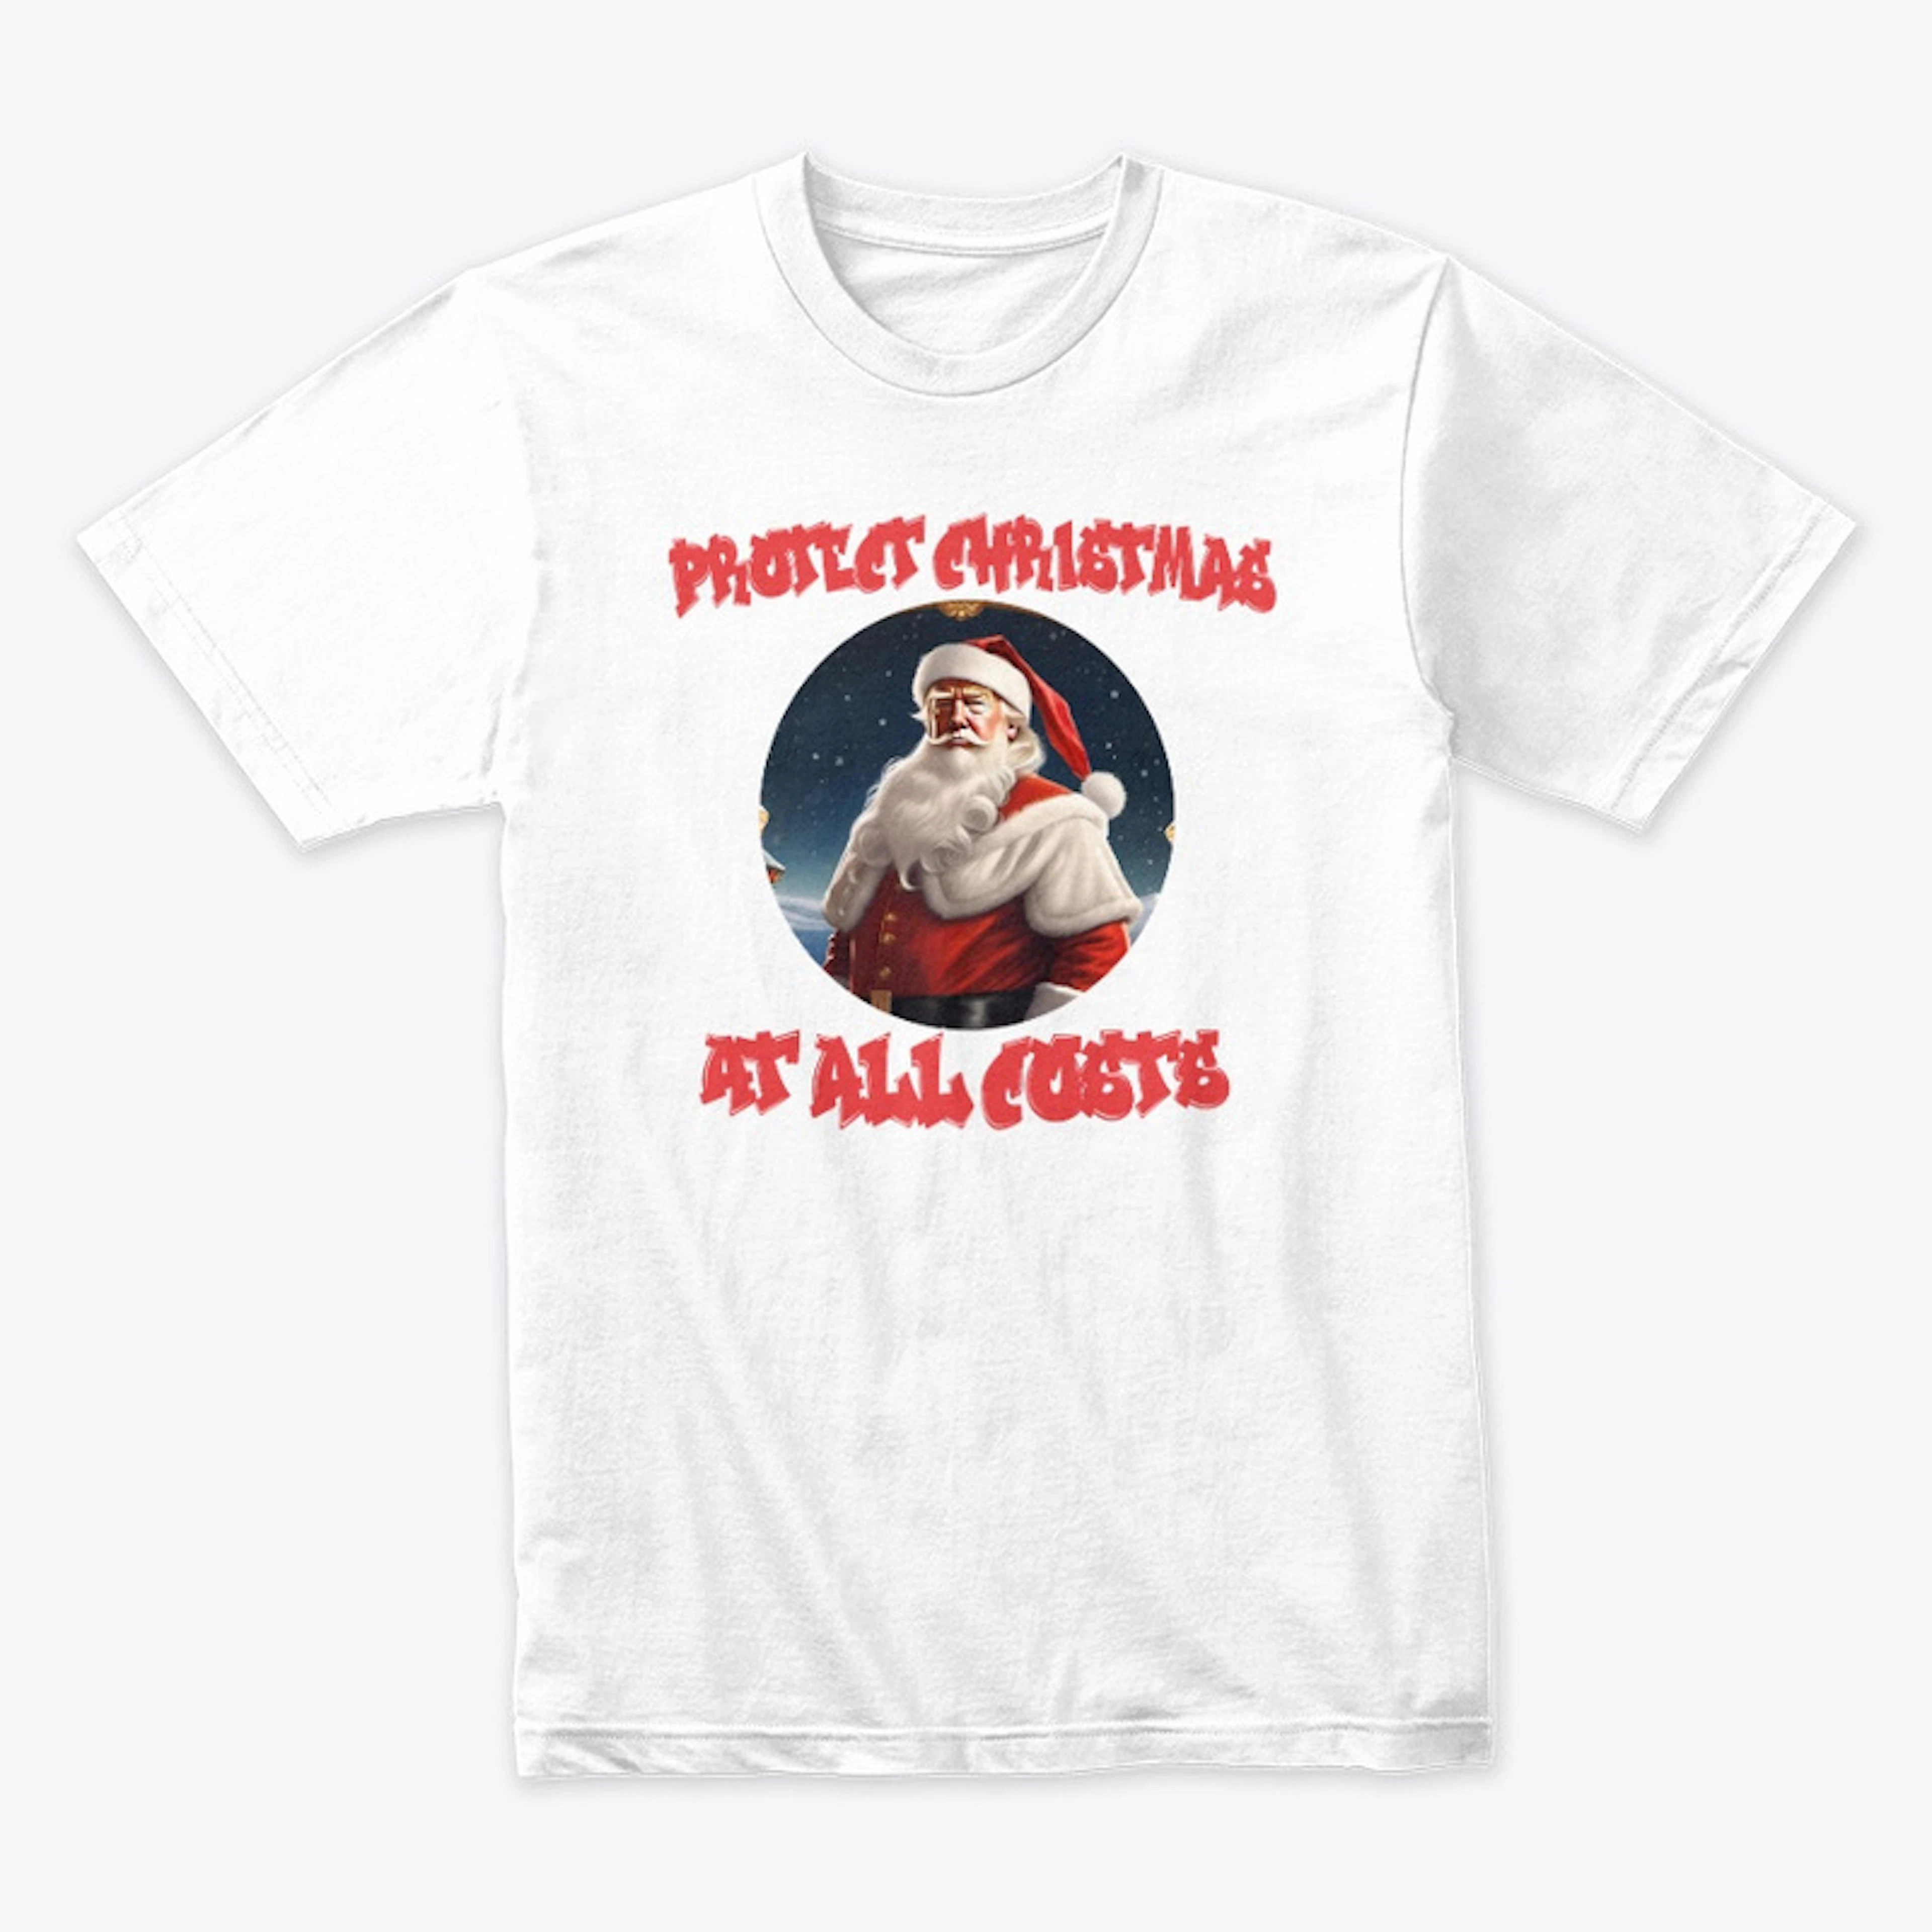 Protect Christmas - DT1 Collection